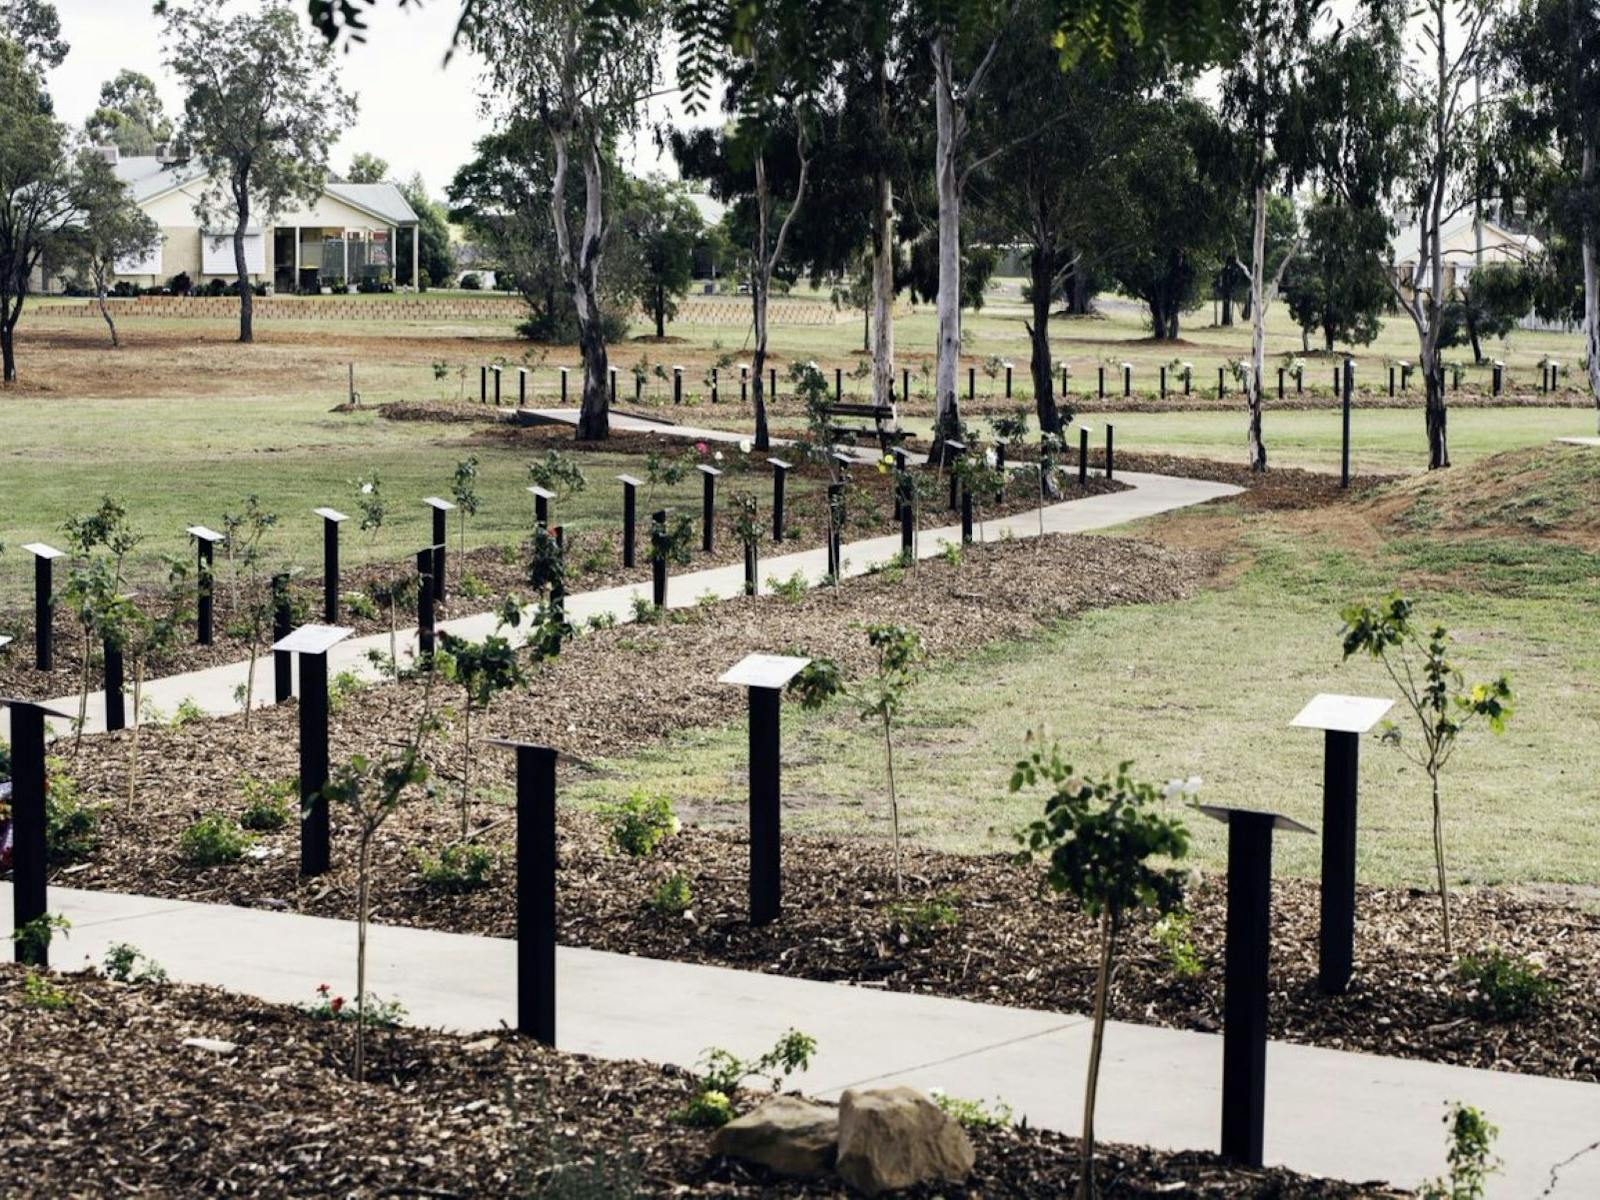 A winding path with plaques and rose bushes in memory of the early Wandoan soldier settlers.